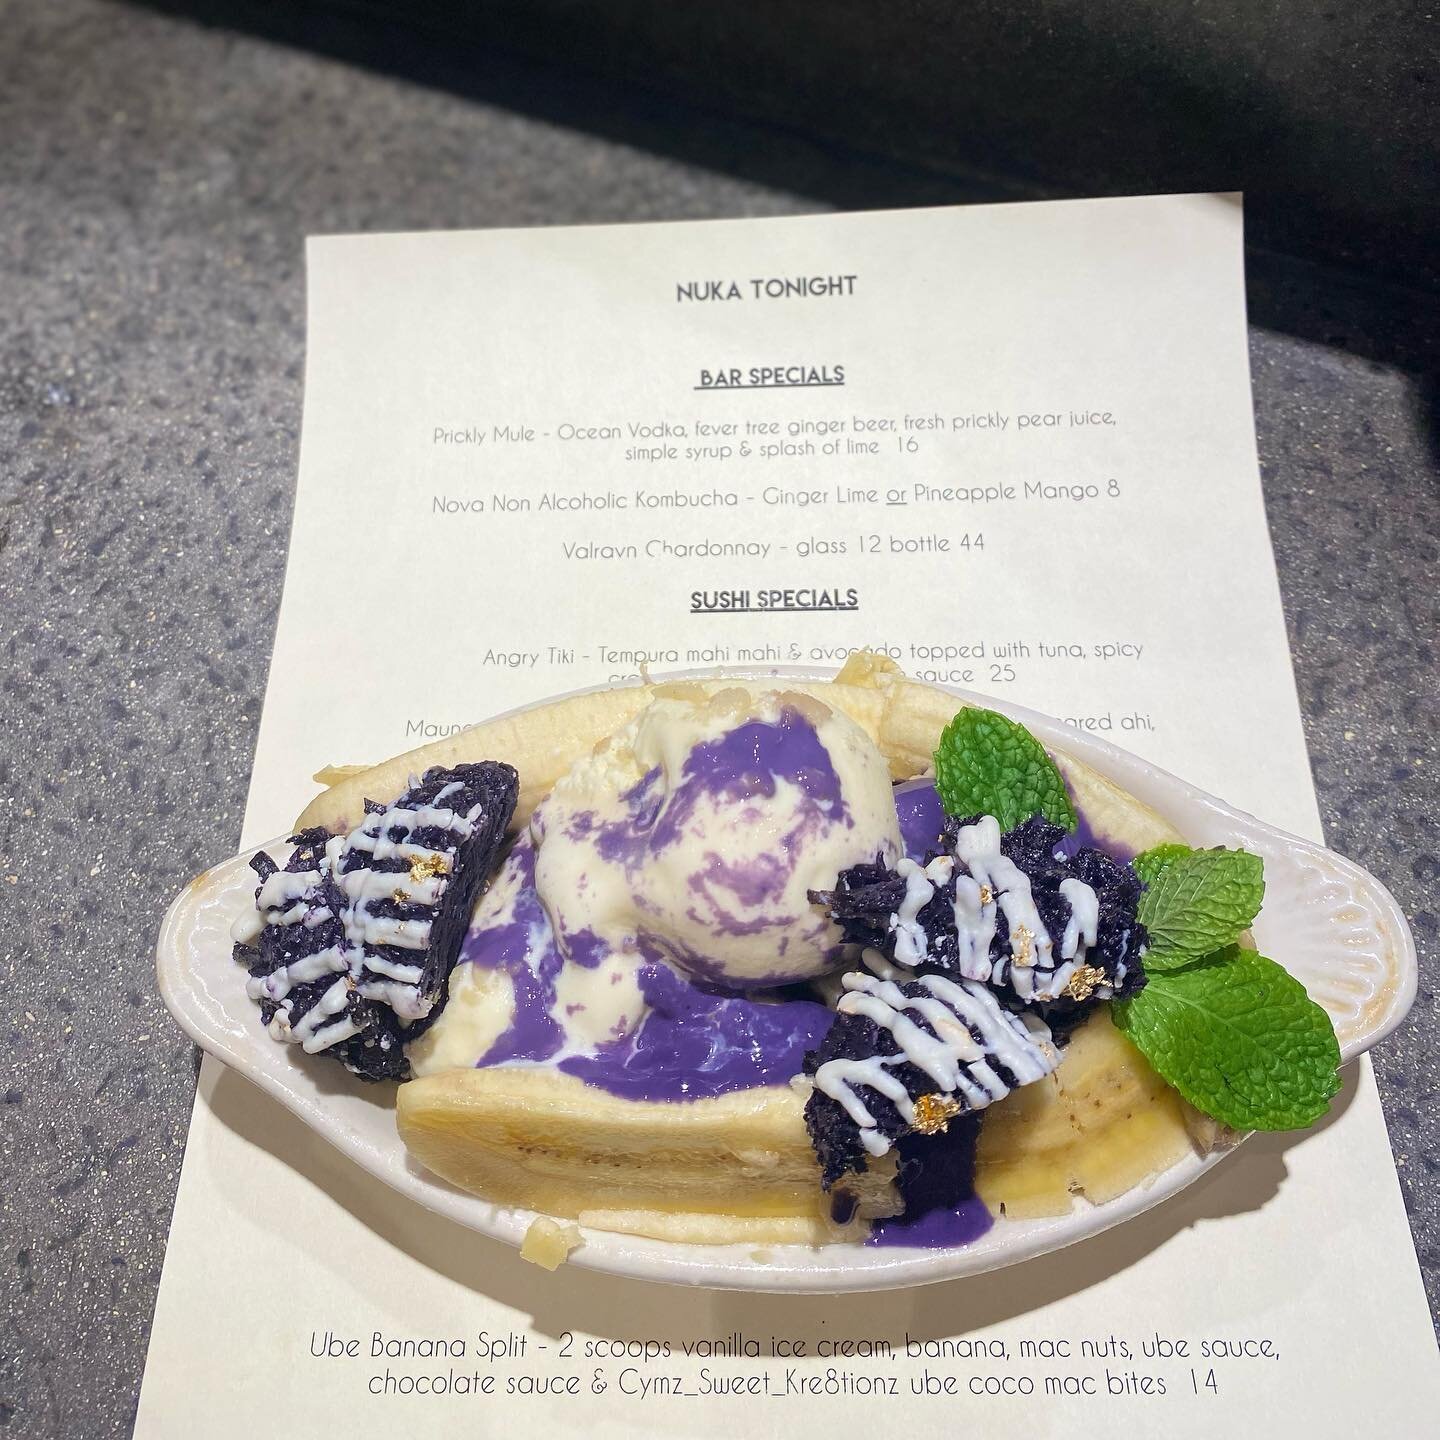 Sushi 🍣 Sunday @nukamaui ended with a sweet collaboration UBE BANANA SPLIT SPECIAL featuring our onolicious Ube Coco Mac Bitez &trade;️it was off the charts BOMB. 
.
.
.
.
When food brings talented humans together, and become sweet friends. Mahalo c